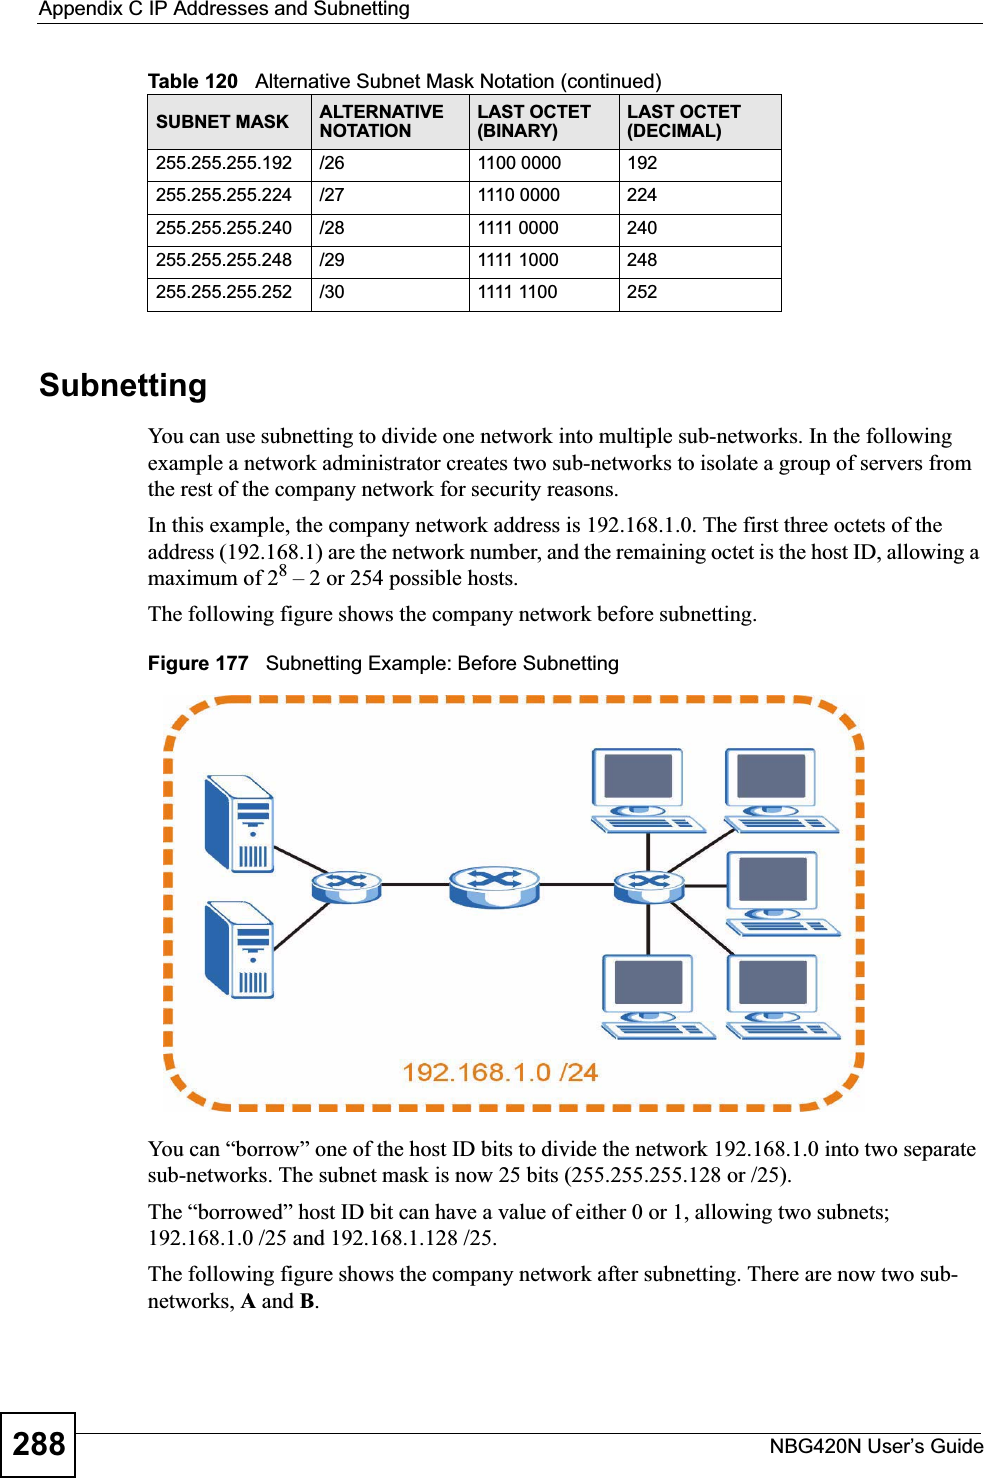 Appendix C IP Addresses and SubnettingNBG420N User’s Guide288SubnettingYou can use subnetting to divide one network into multiple sub-networks. In the following example a network administrator creates two sub-networks to isolate a group of servers from the rest of the company network for security reasons.In this example, the company network address is 192.168.1.0. The first three octets of the address (192.168.1) are the network number, and the remaining octet is the host ID, allowing a maximum of 28 – 2 or 254 possible hosts.The following figure shows the company network before subnetting.  Figure 177   Subnetting Example: Before SubnettingYou can “borrow” one of the host ID bits to divide the network 192.168.1.0 into two separate sub-networks. The subnet mask is now 25 bits (255.255.255.128 or /25).The “borrowed” host ID bit can have a value of either 0 or 1, allowing two subnets; 192.168.1.0 /25 and 192.168.1.128 /25. The following figure shows the company network after subnetting. There are now two sub-networks, A and B.255.255.255.192 /26 1100 0000 192255.255.255.224 /27 1110 0000 224255.255.255.240 /28 1111 0000 240255.255.255.248 /29 1111 1000 248255.255.255.252 /30 1111 1100 252Table 120   Alternative Subnet Mask Notation (continued)SUBNET MASK ALTERNATIVE NOTATIONLAST OCTET (BINARY)LAST OCTET (DECIMAL)